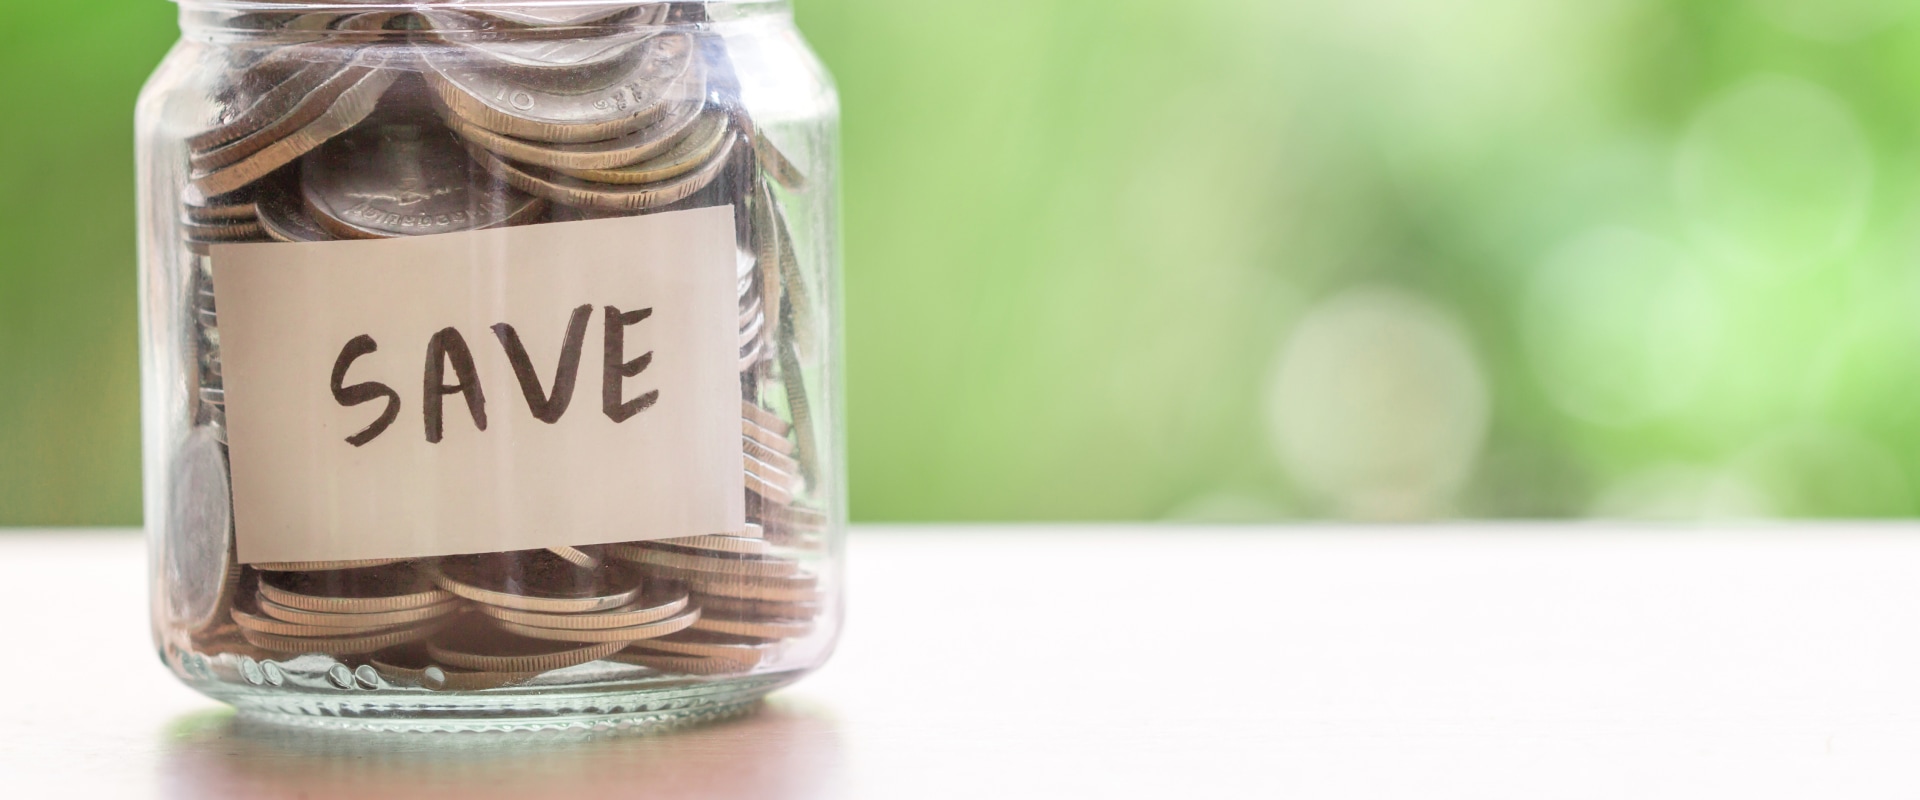 Cutting Expenses: A Comprehensive Look at Saving Money